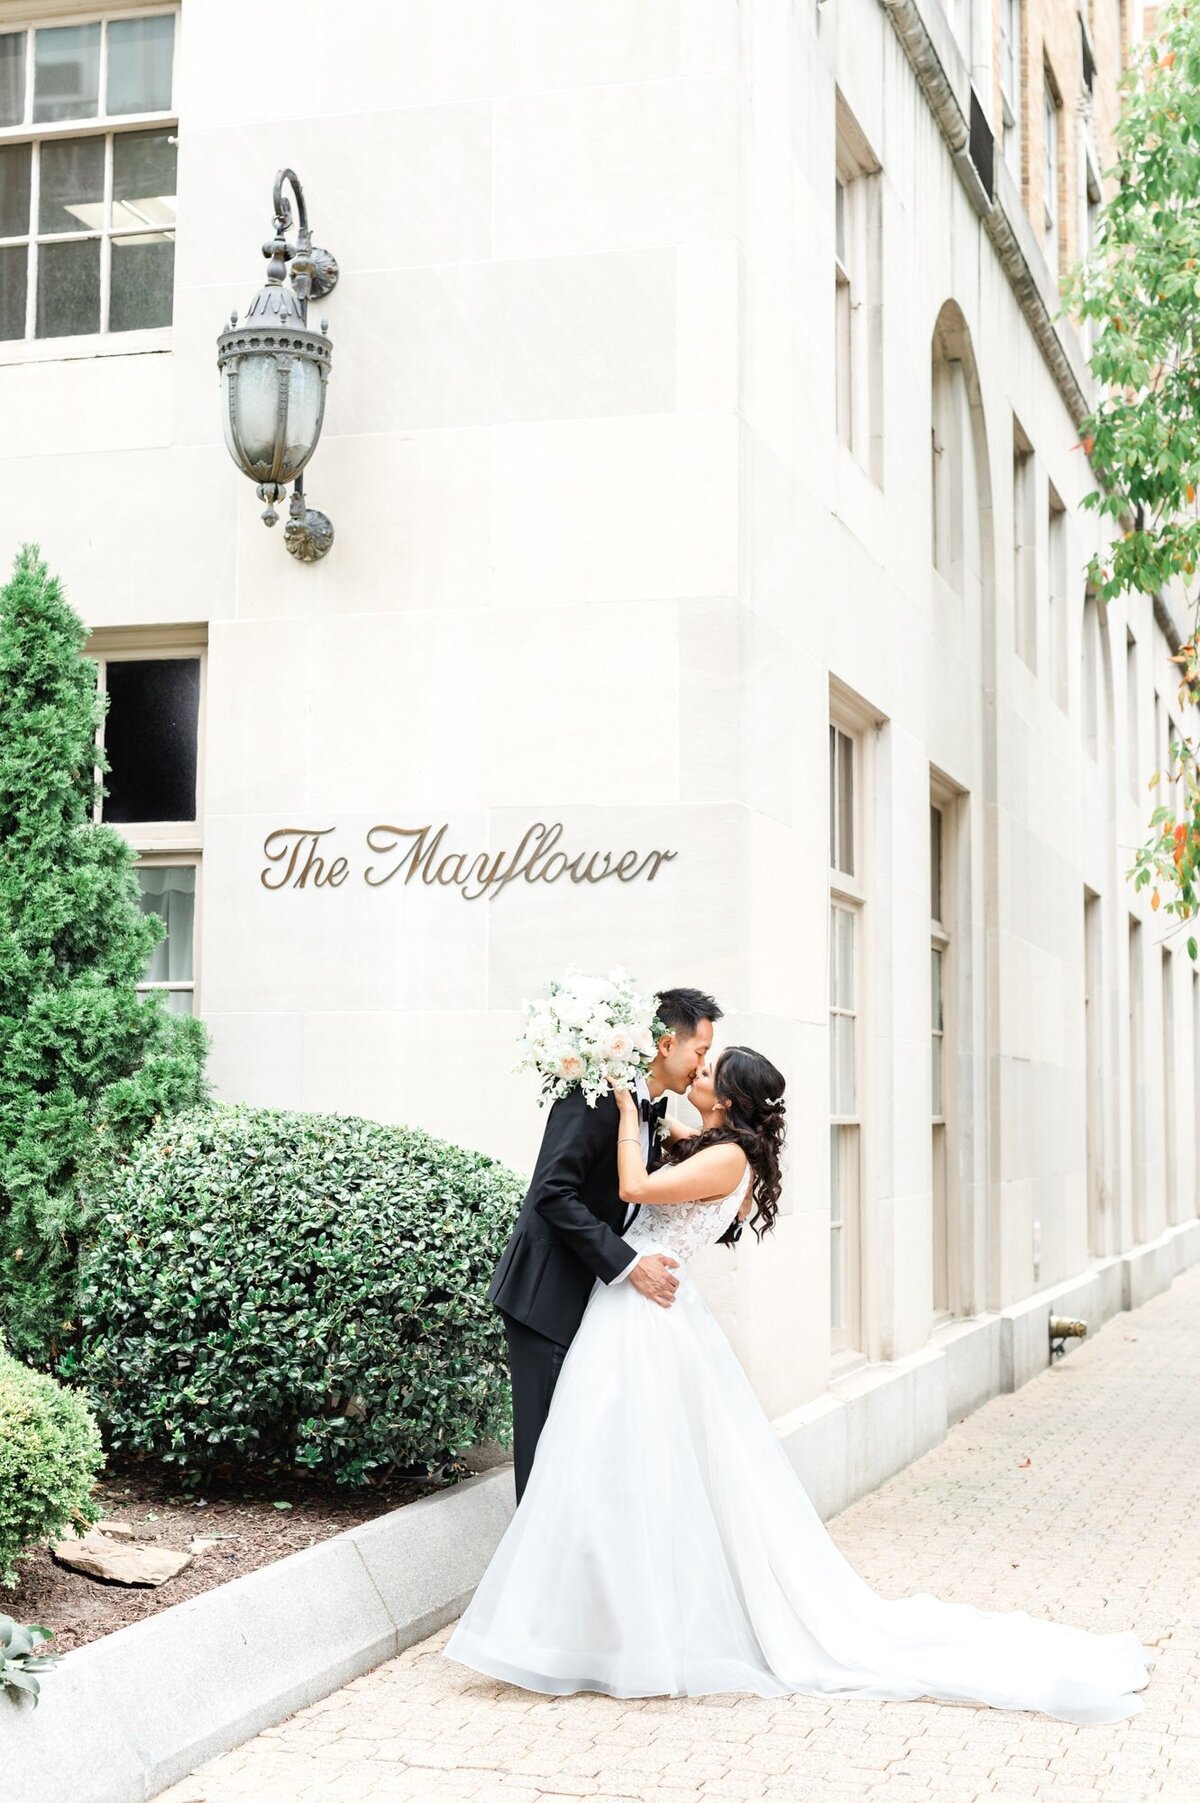 Wedding at The Mayflower Hotel with Bride and Groom kissing under the hotel sign